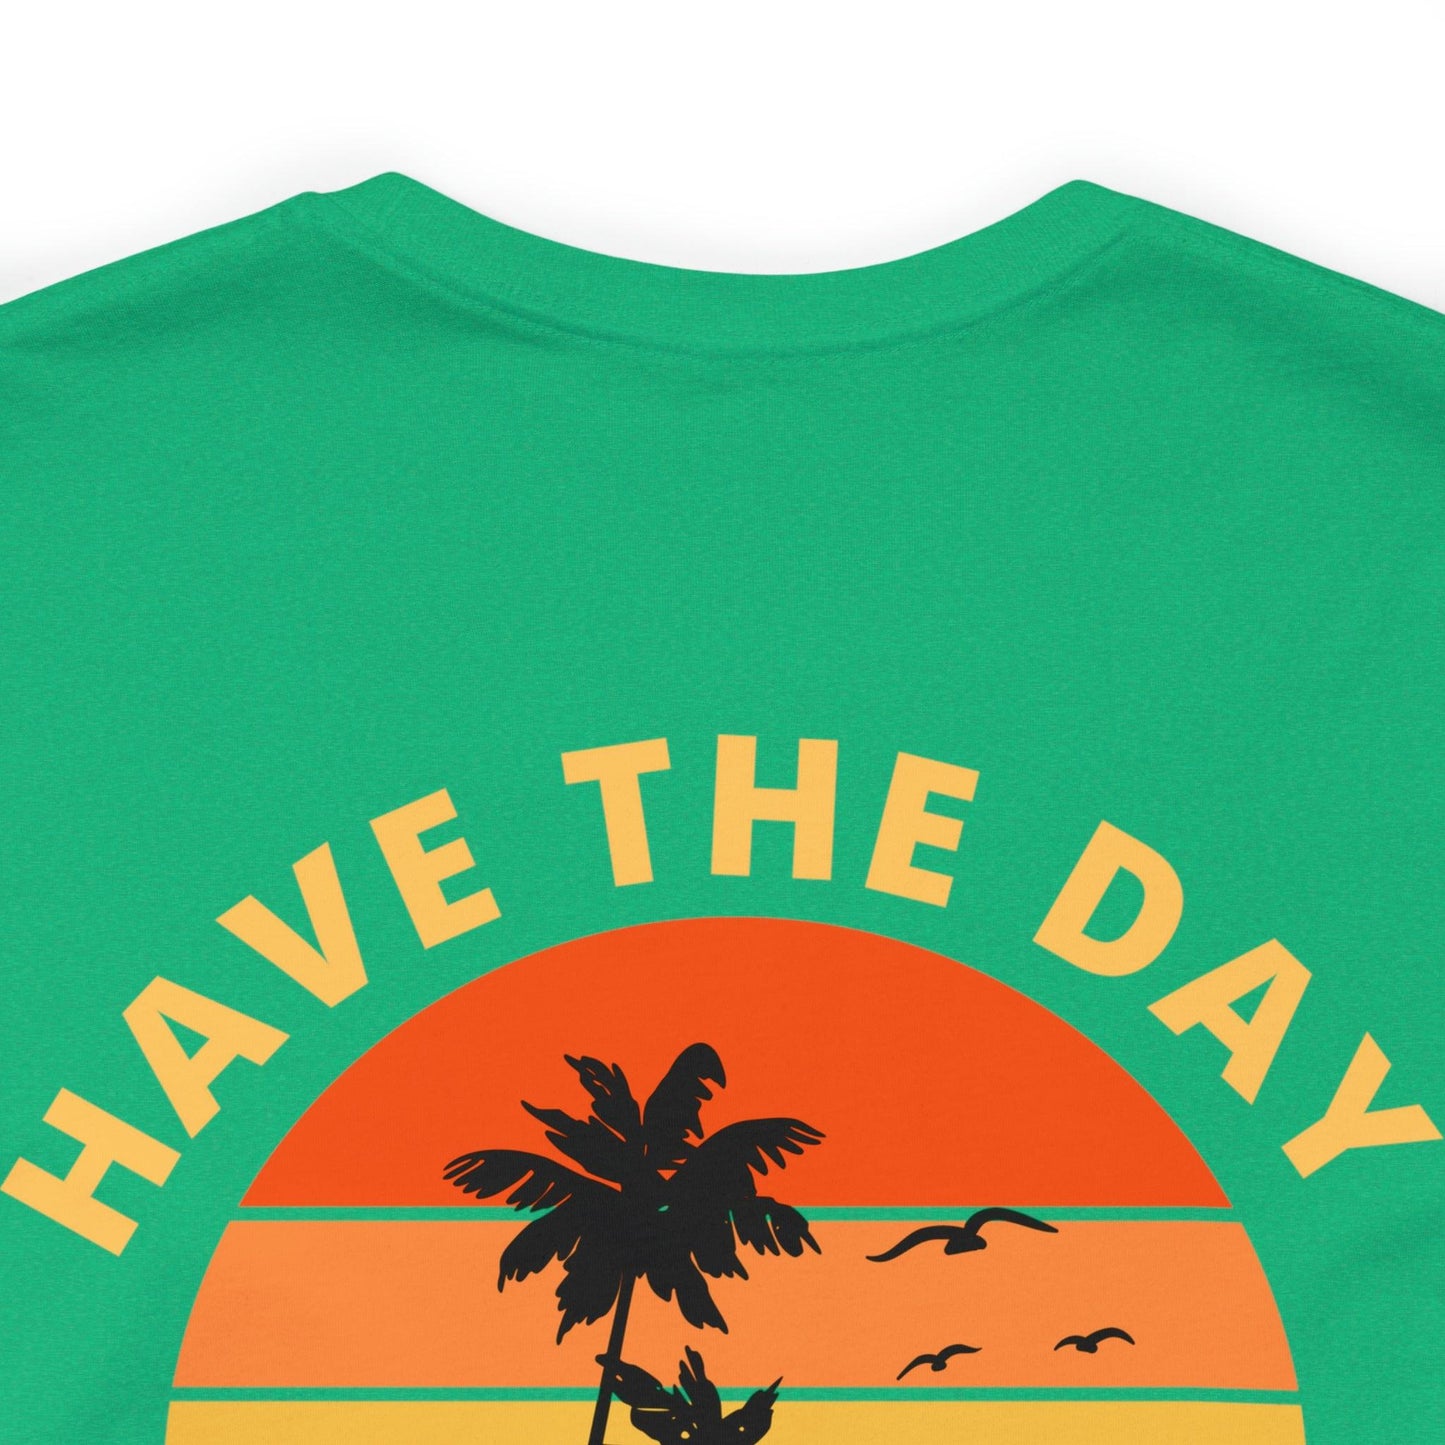 Have the Day You Deserve T-Shirt, Inspirational Graphic Tee, Motivational Tee, Positive Vibes Shirt, Trendy shirt and Eye Catching shirt - Giftsmojo